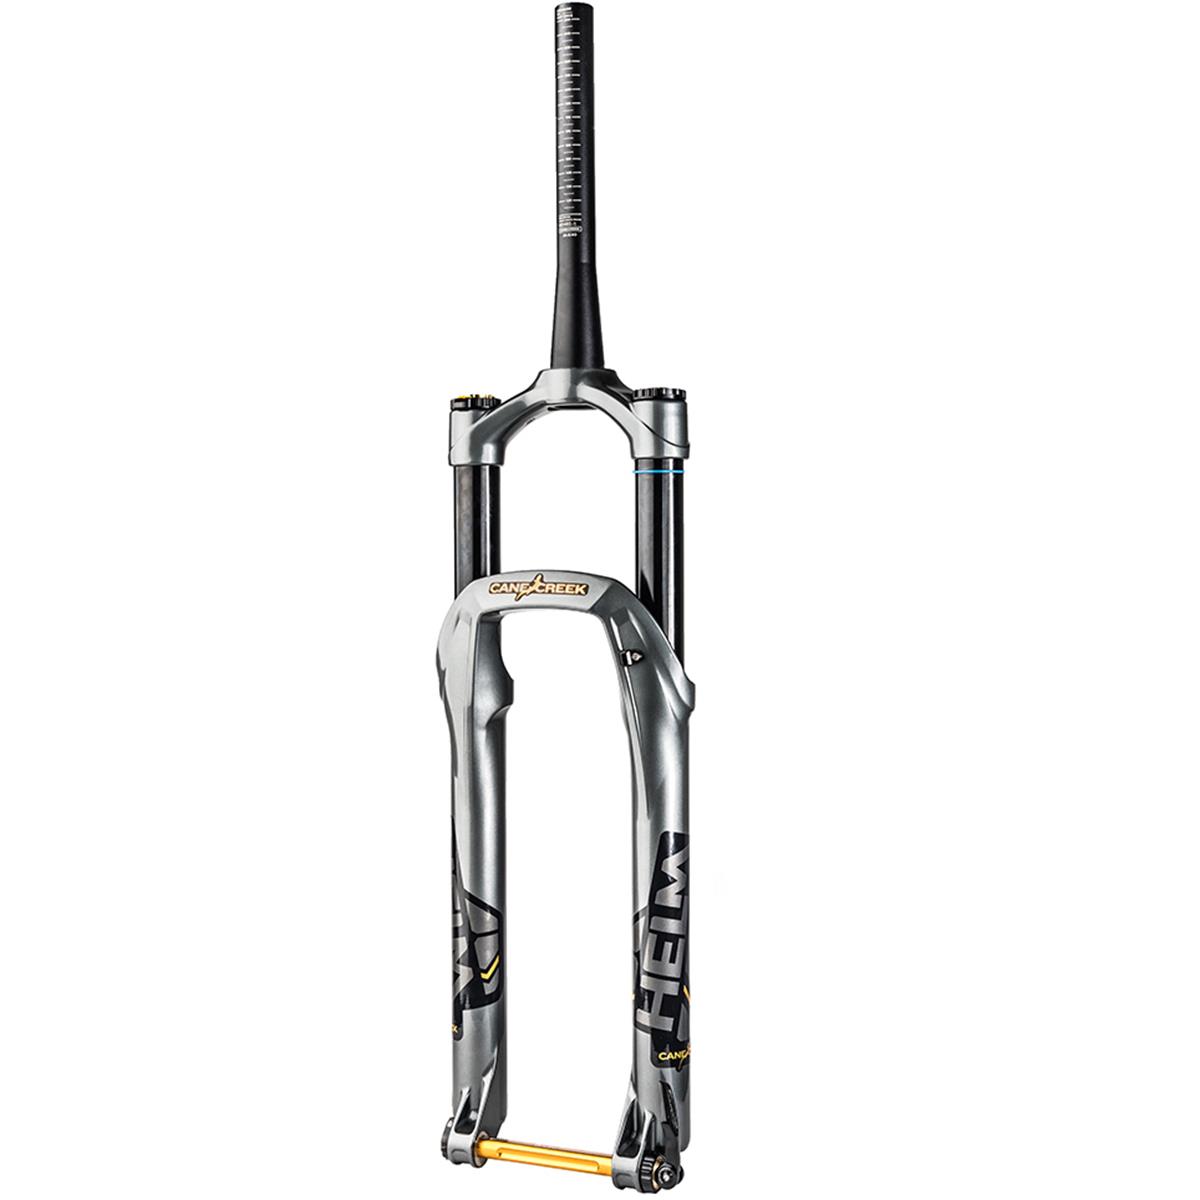 Cane Creek Suspension Fork Helm Air Boost Gun Metal Grey, 29 Inches, Tapered, 15 x 110 mm (Boost)